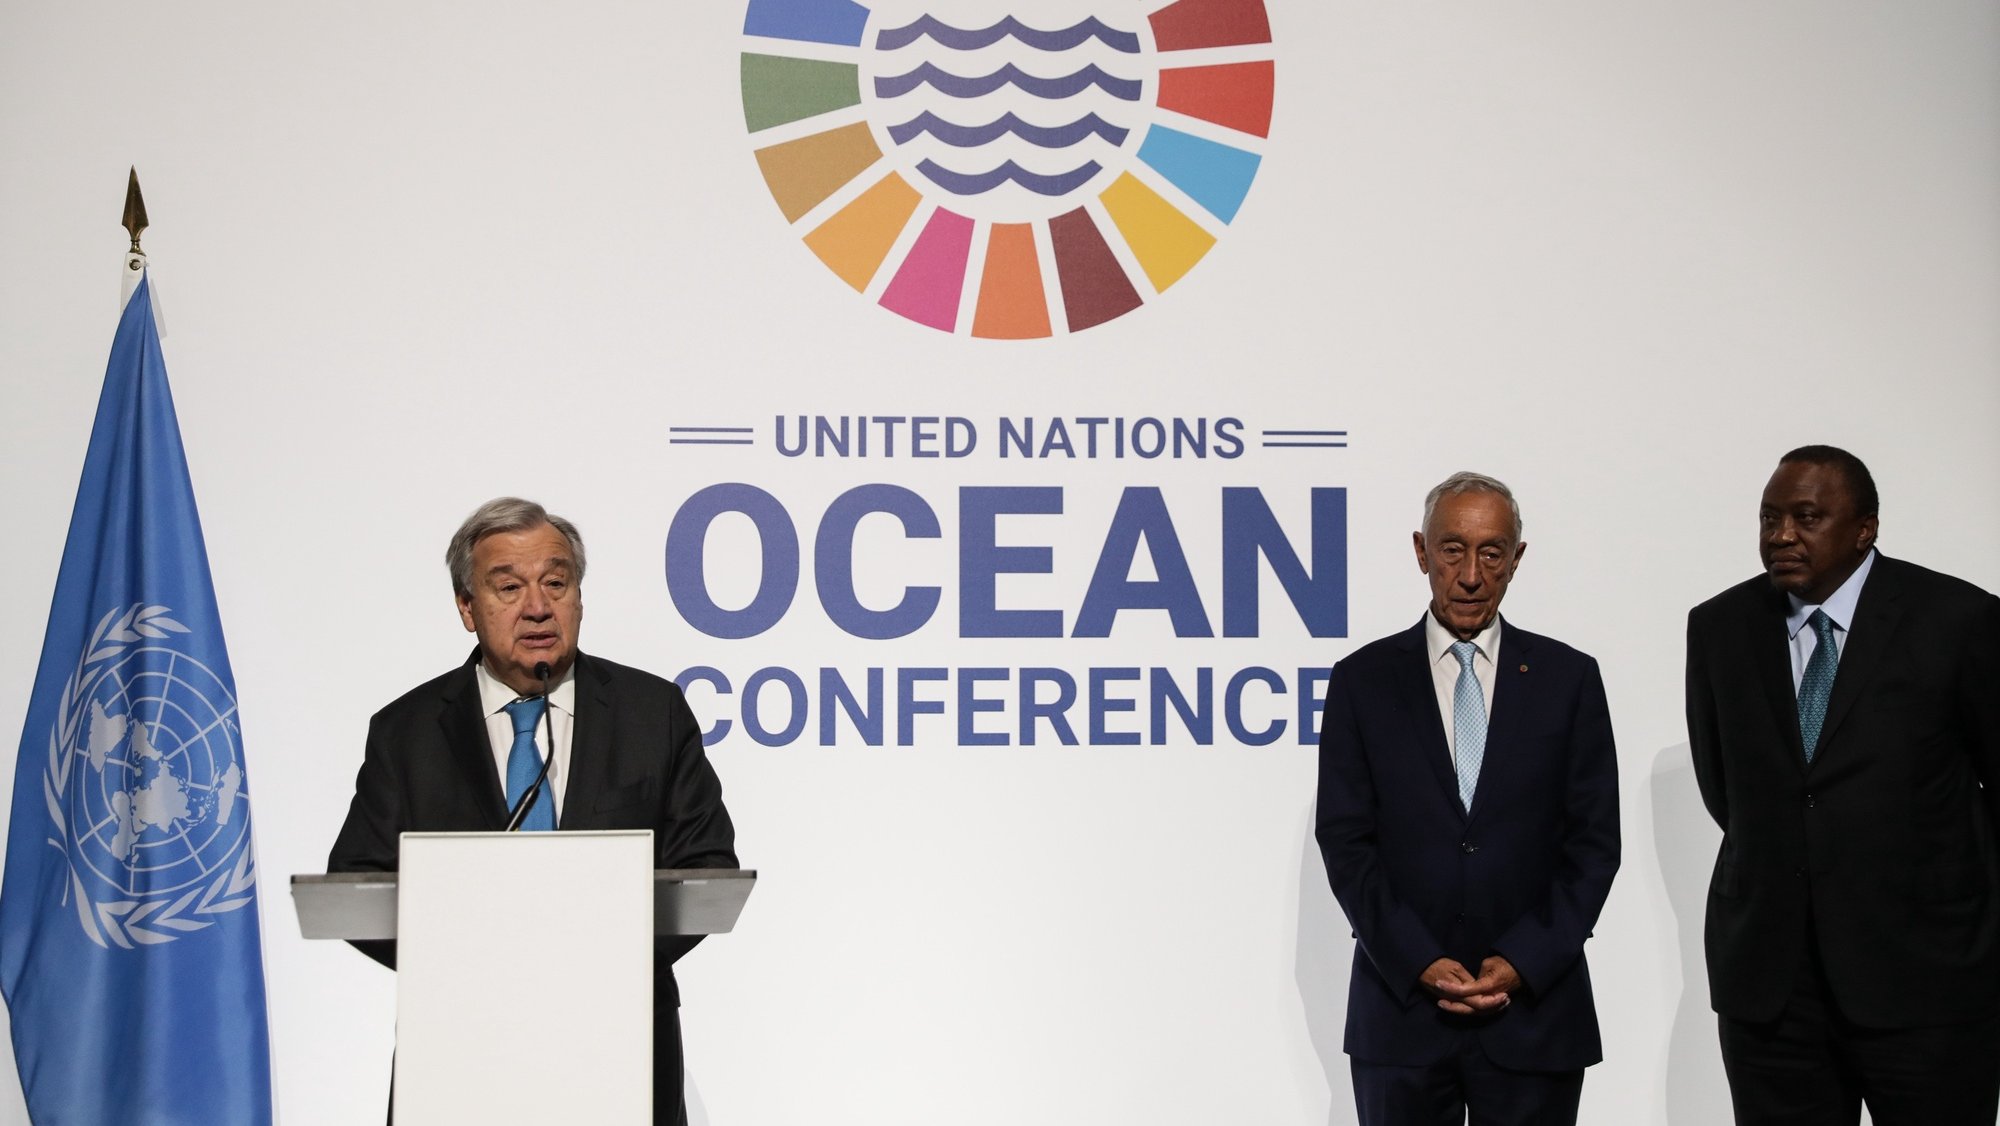 United Nations general secretary Antonio Guterres (L) together Portuguese President Marcelo Rebelo de Sousa (C) and Kenya President Uhuru Kenyatta (R) during the press conference of the opening of UN Ocean Conference plenary session at Lisbon, 27th june 2022. TIAGO PETINGA/LUSA